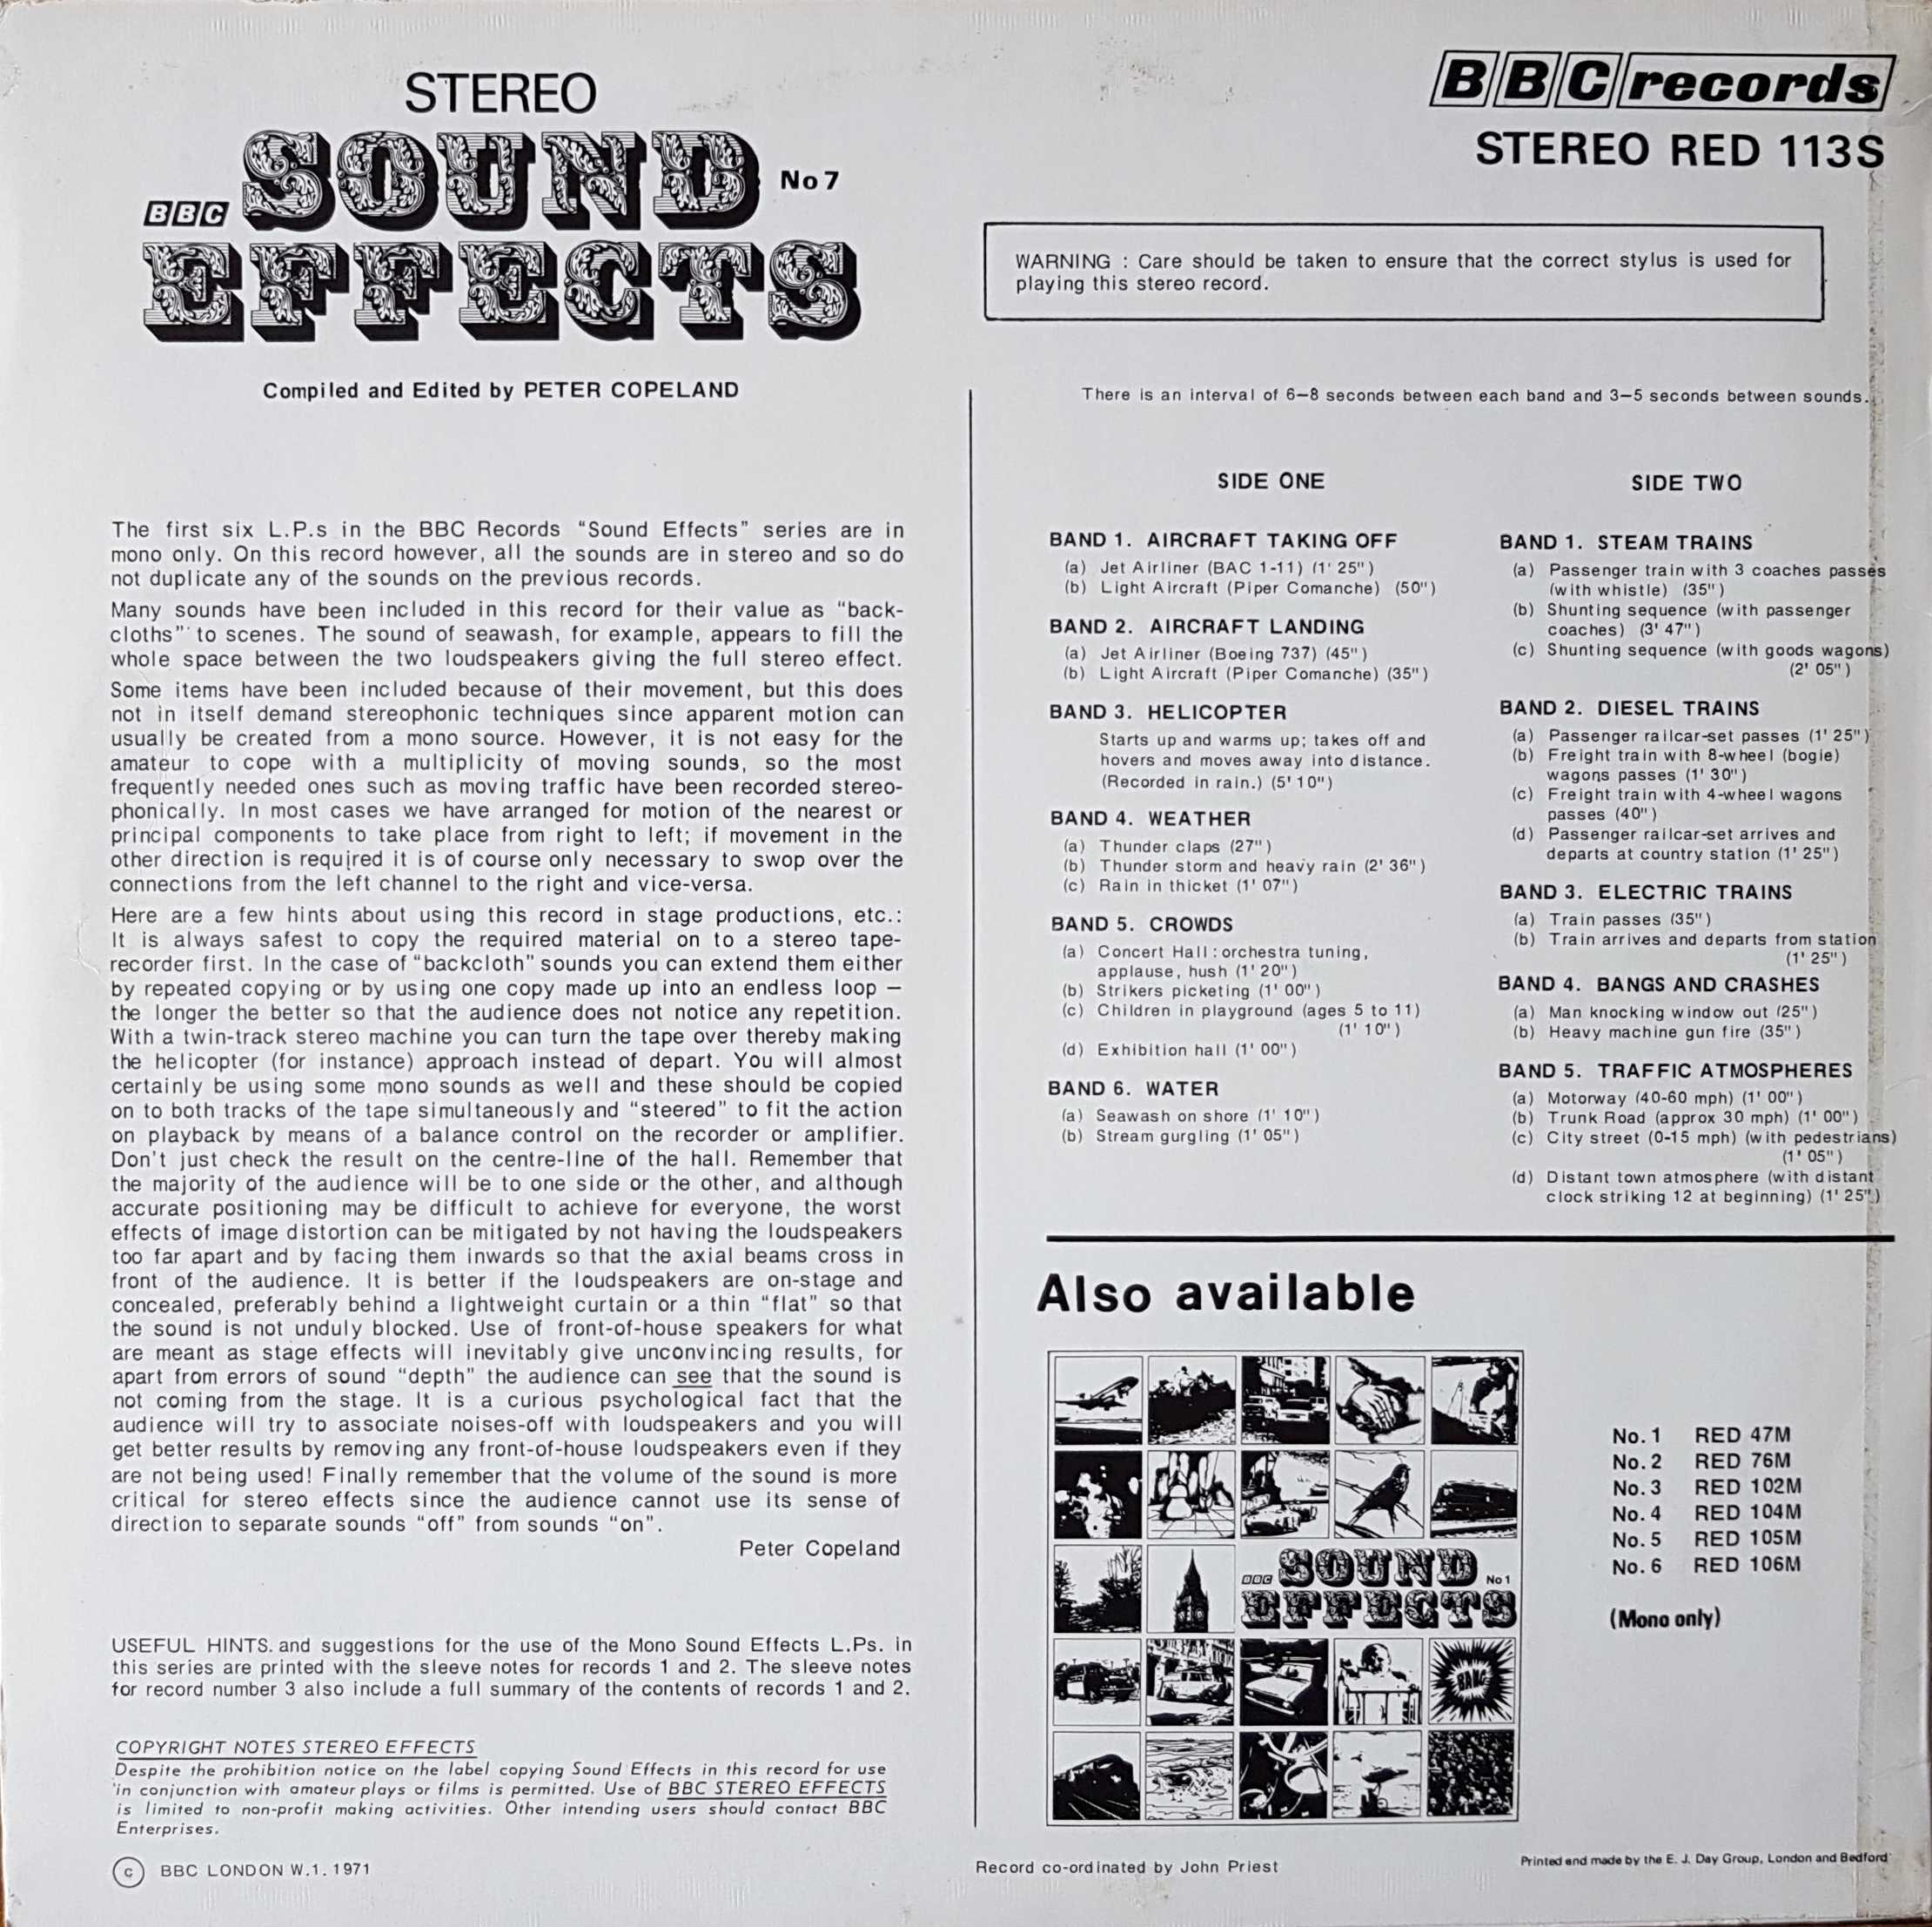 Picture of RED 113 Sound effects no. 7 by artist Various from the BBC records and Tapes library